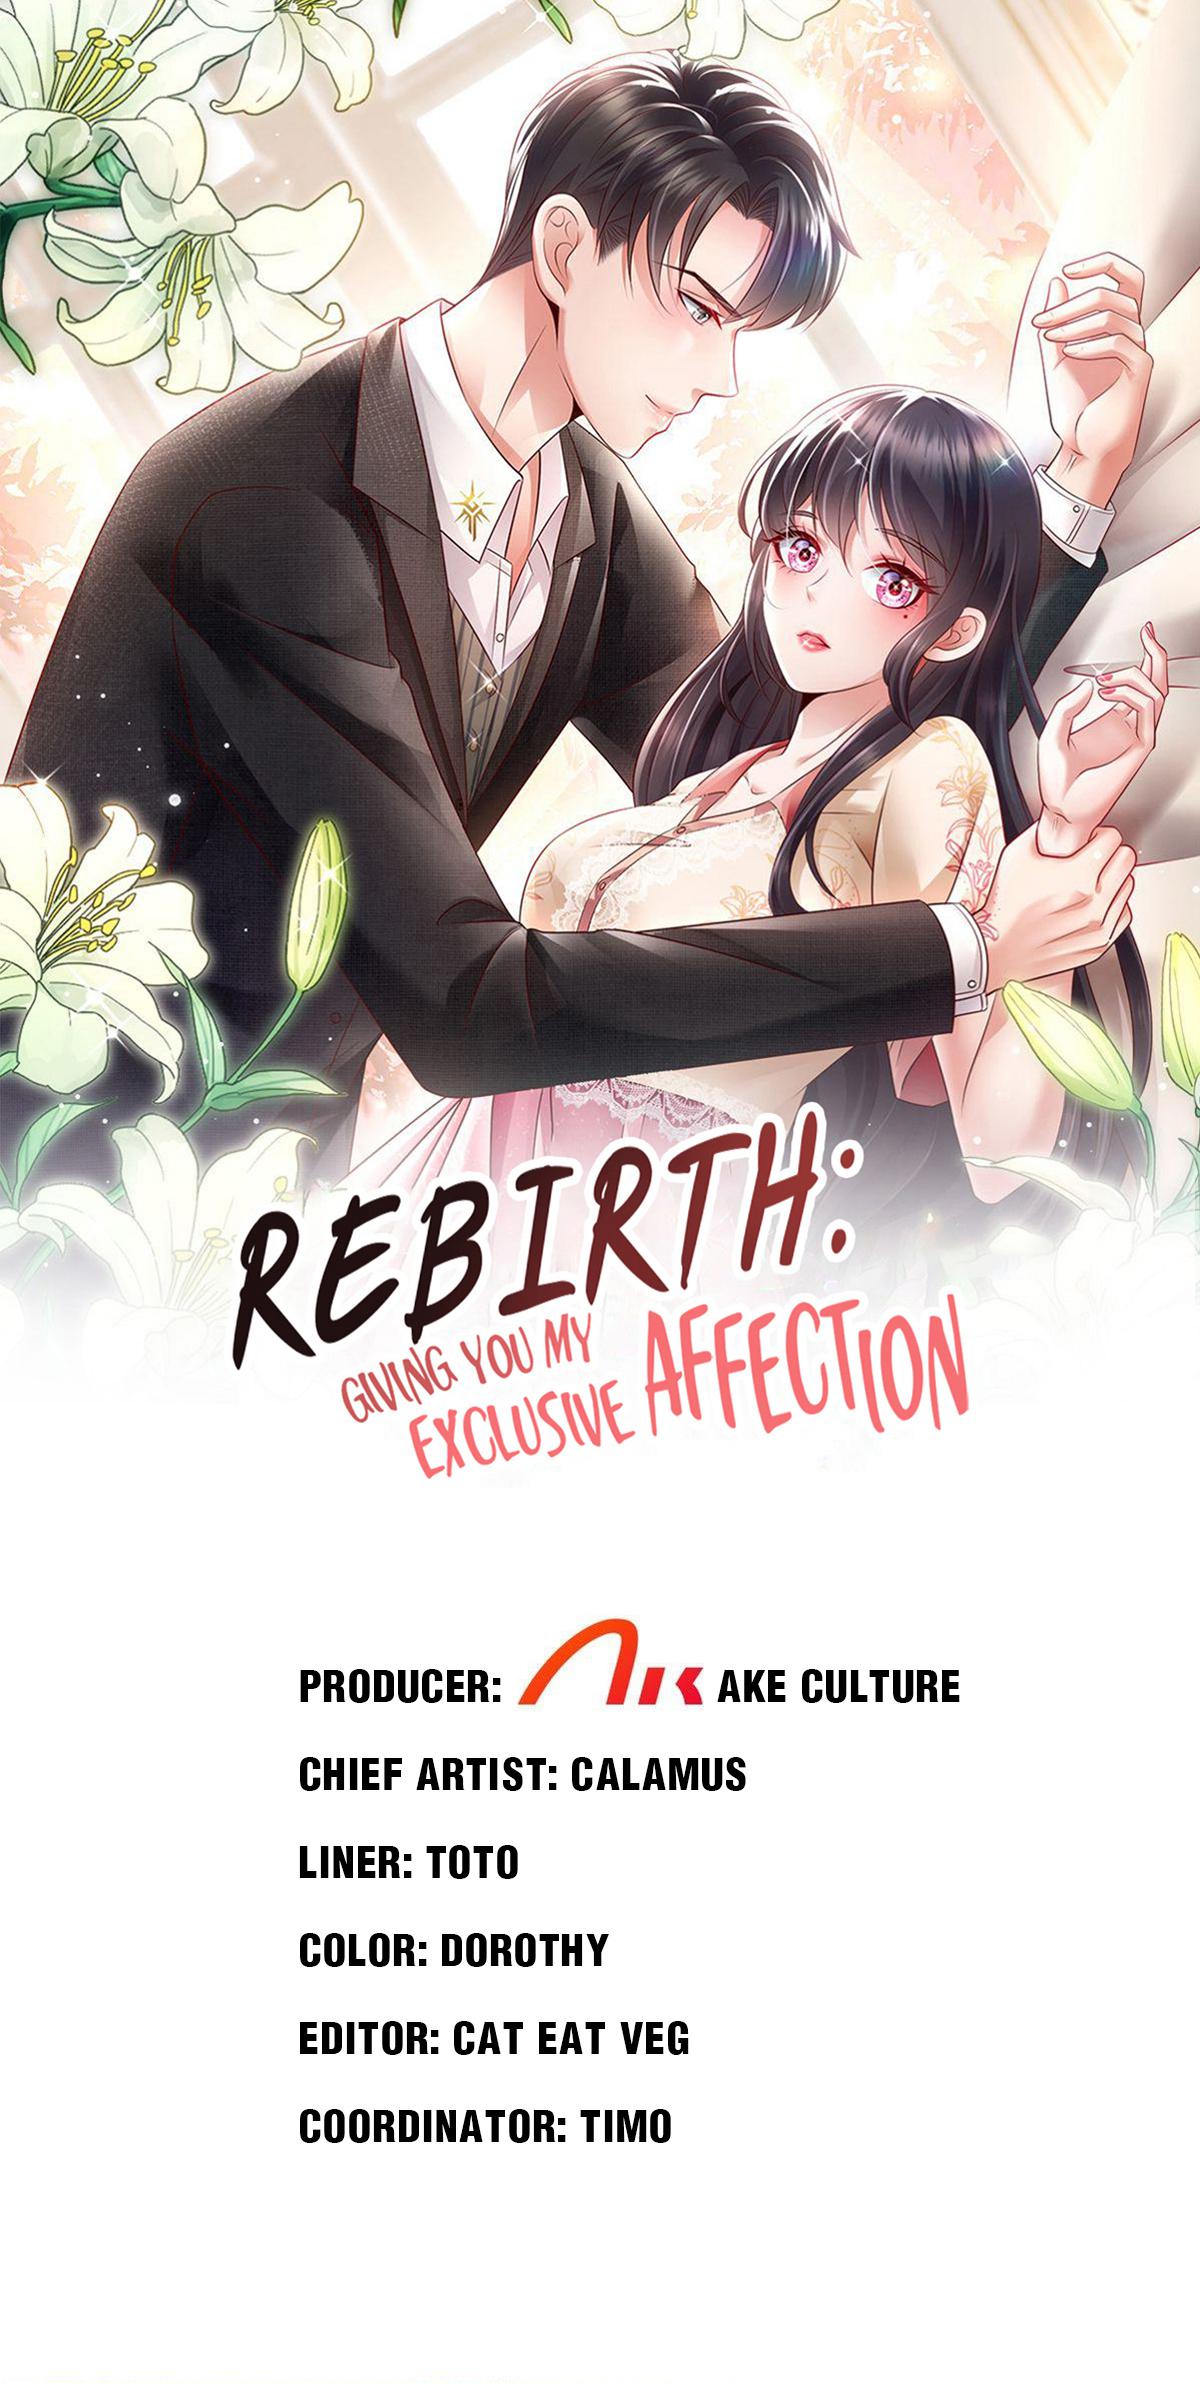 Rebirth: Giving You My Exclusive Affection 133